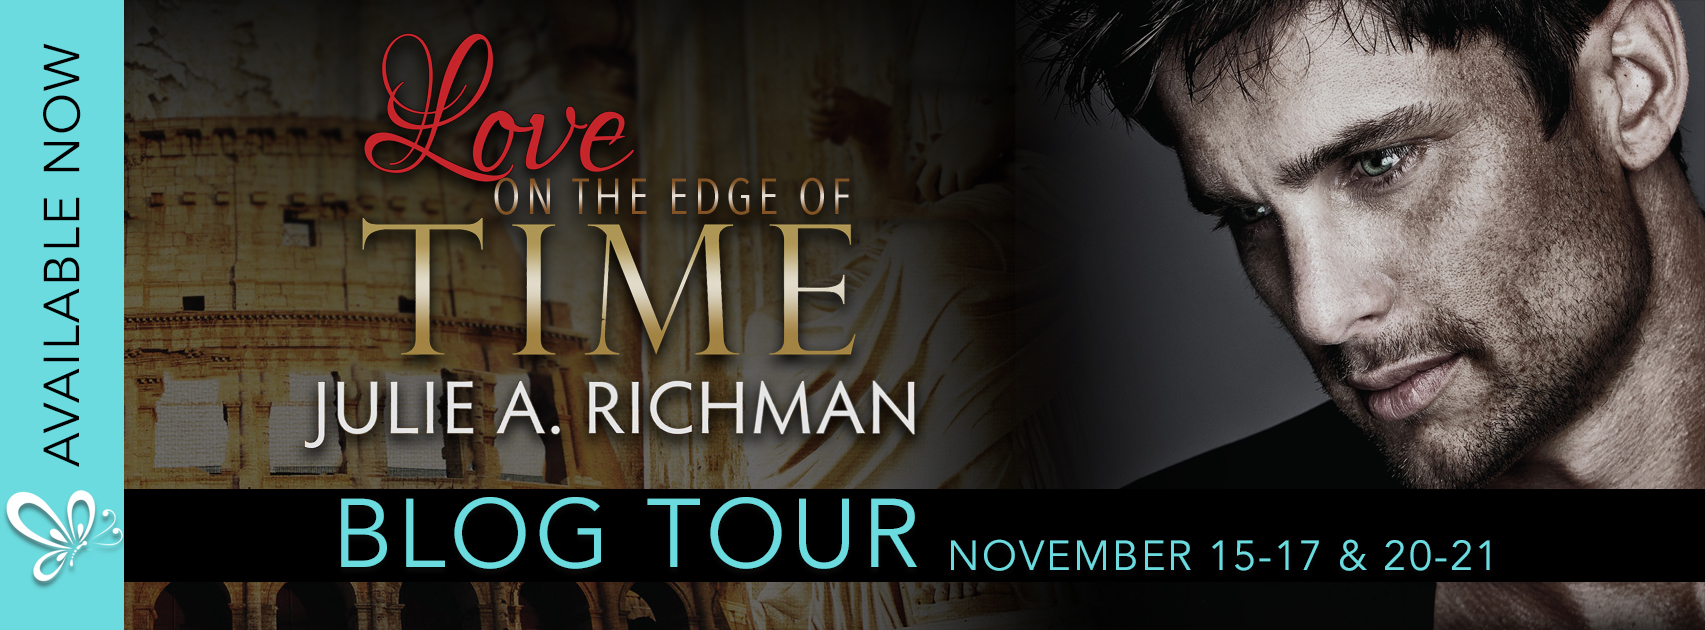 Blog Tour:  Love on the Edge of Time by Julie A. Richman